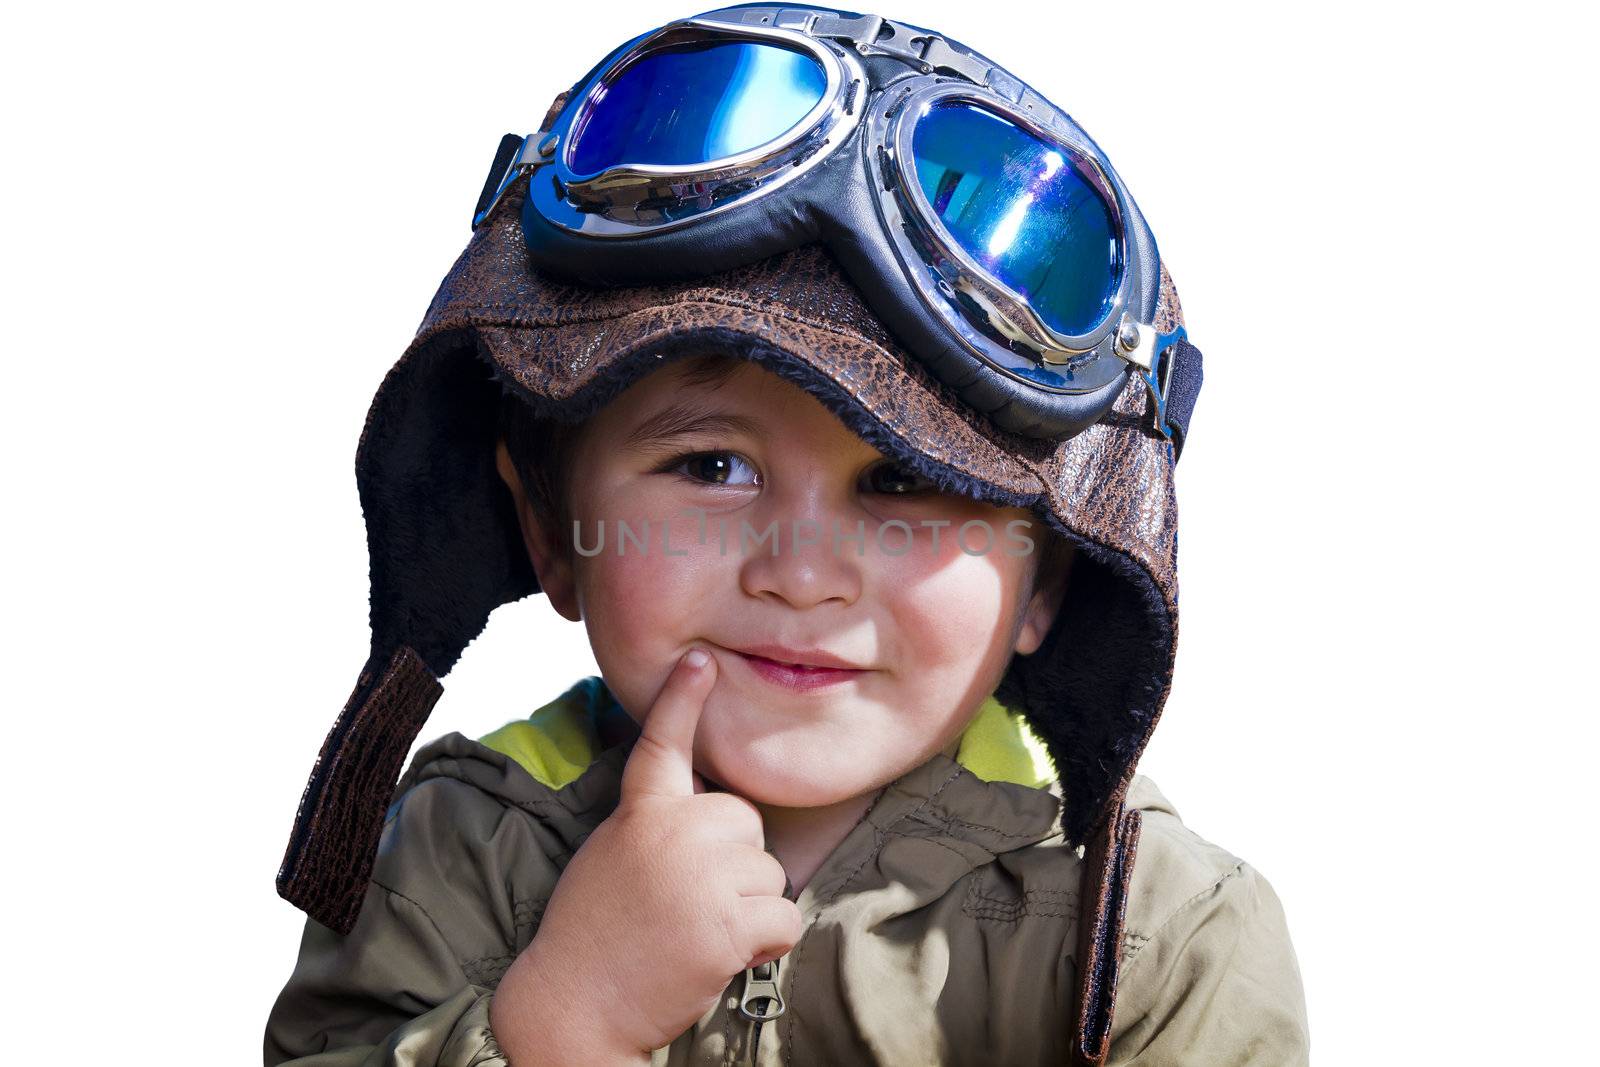 A baby pilot with huge hat and glasses, isolated. by FernandoCortes